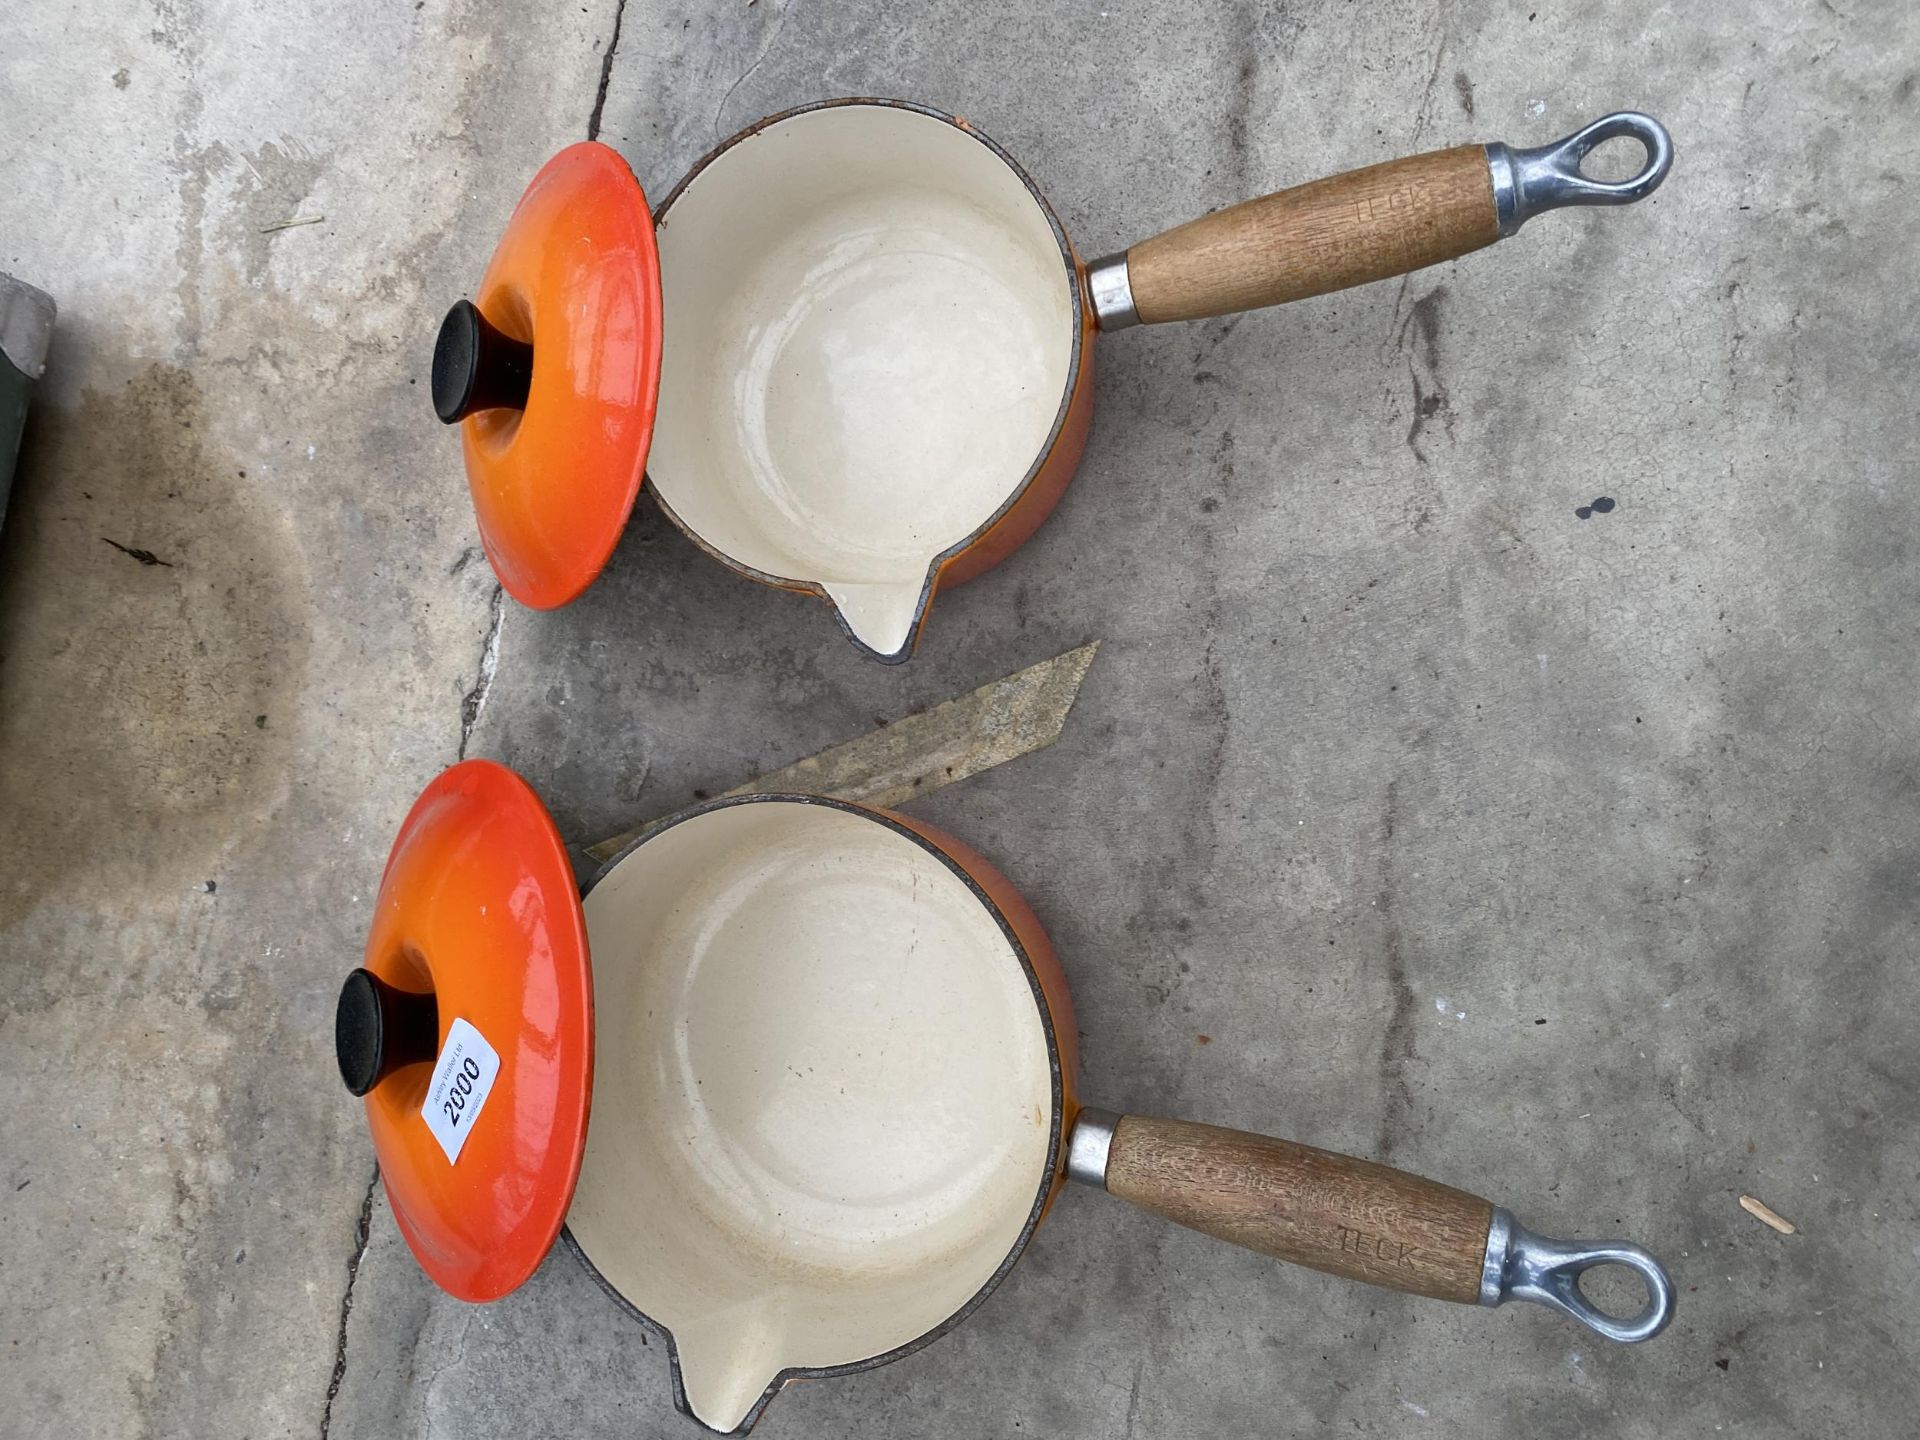 TWO ORANGE LE CREUSET PANS WITH WOODEN HANDLES AND LIDS - Image 2 of 4